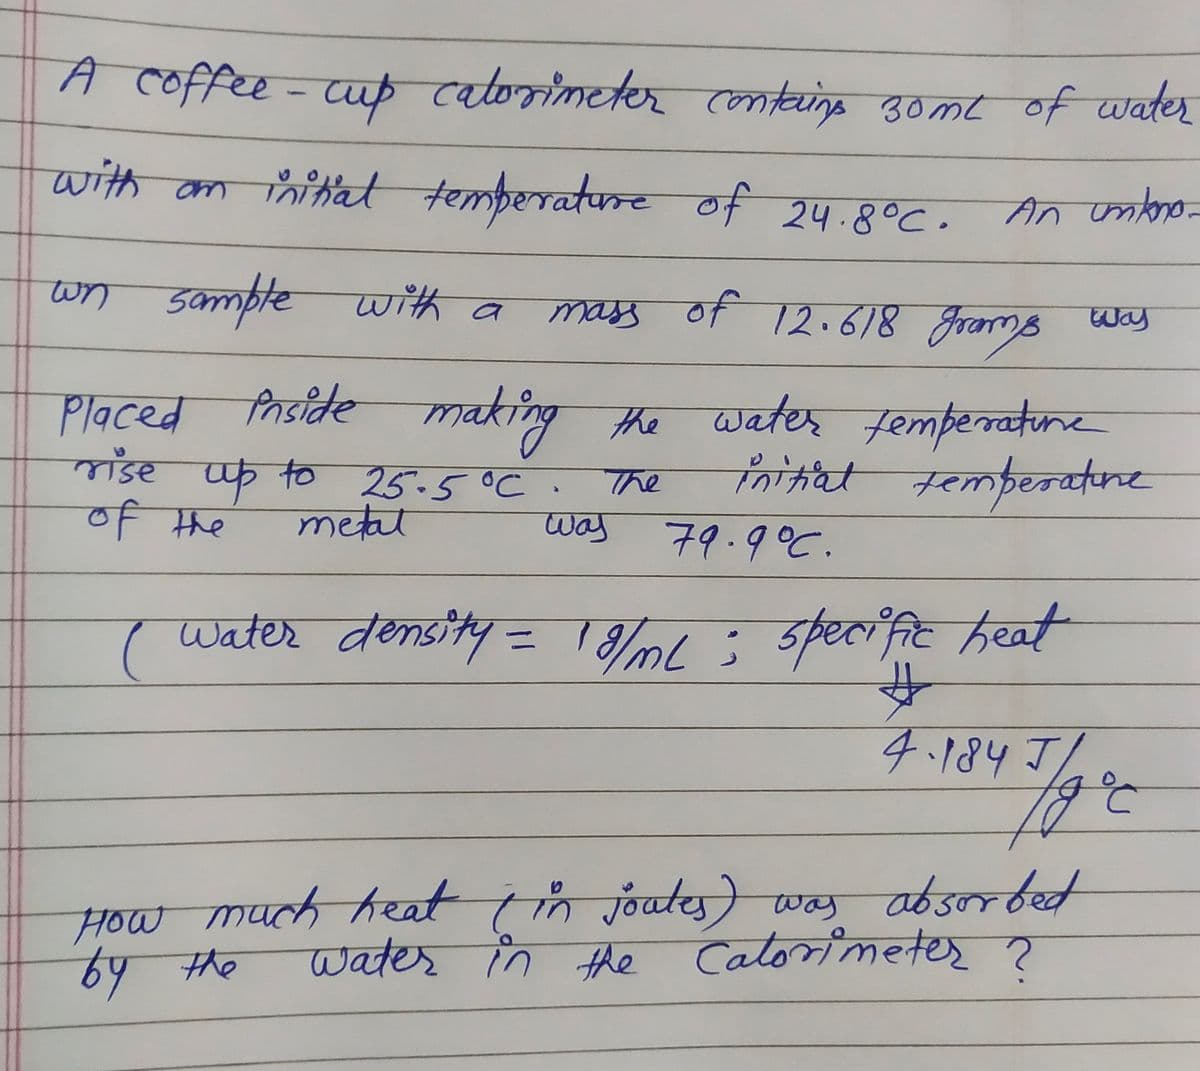 A coffee - cup catorimeter containg 30me of water
with am nitat temperature of 24.8°C.
An onbro-
wn sample with a
mass of 12.618 gramo way
Placed s
Prside making the water
femperratune
माँडर
up to 25-5 °C
गमेघ
initiat temberatene
The
of the
metal
was
79.9°C.
पwtiण वेसडीं प =D 1घक 3 त रिe्य
%3D
4.184 J/
How much heat in joutes) was absorbet
Water in the
Catorimetes ?
64 the
